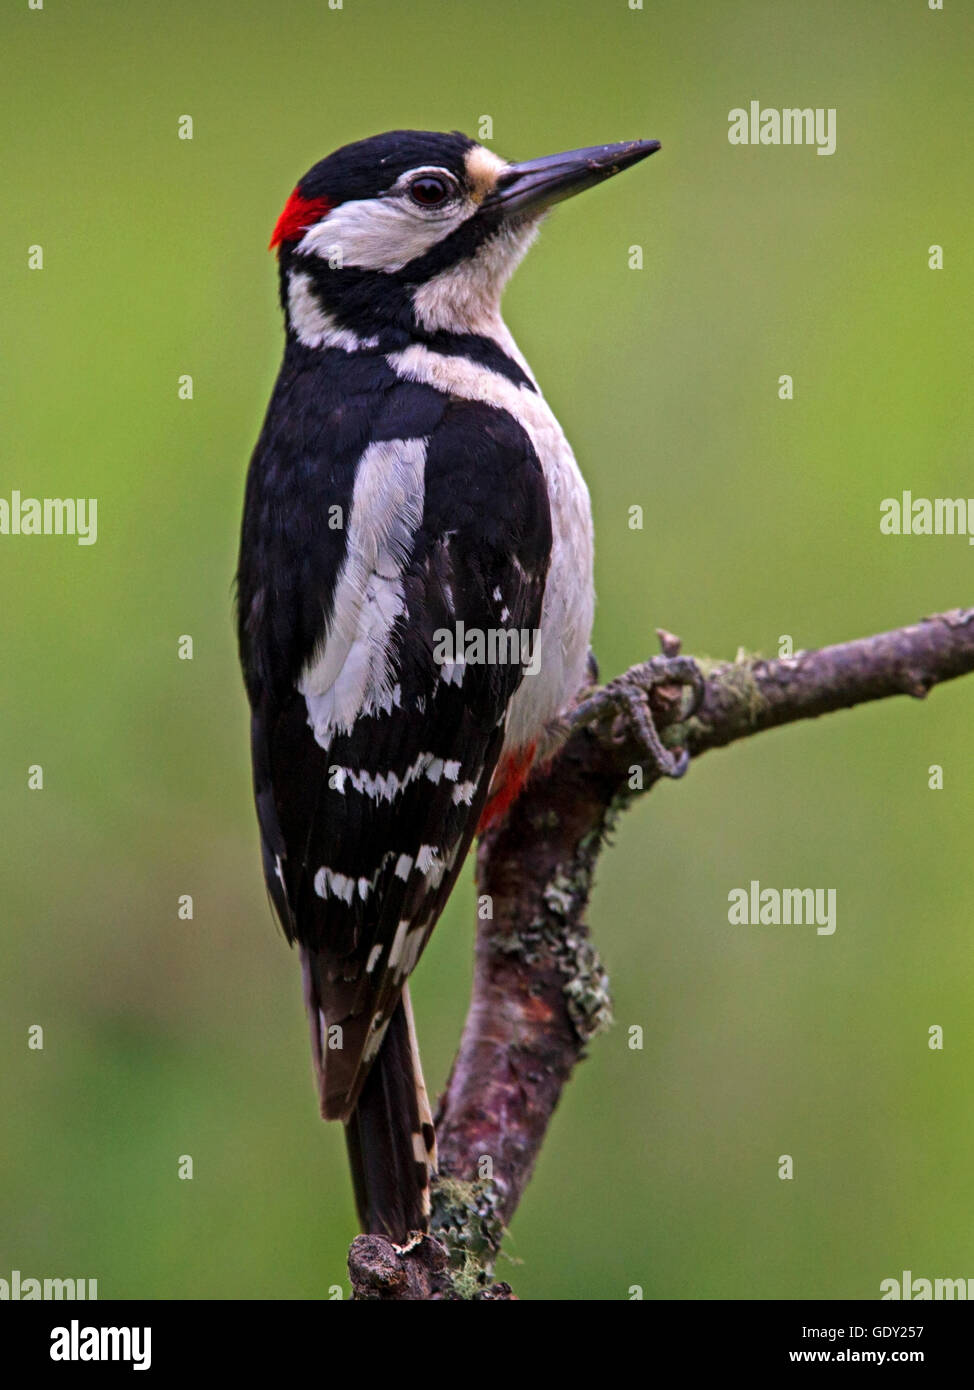 Male great spotted woodpecker perched on branch Stock Photo